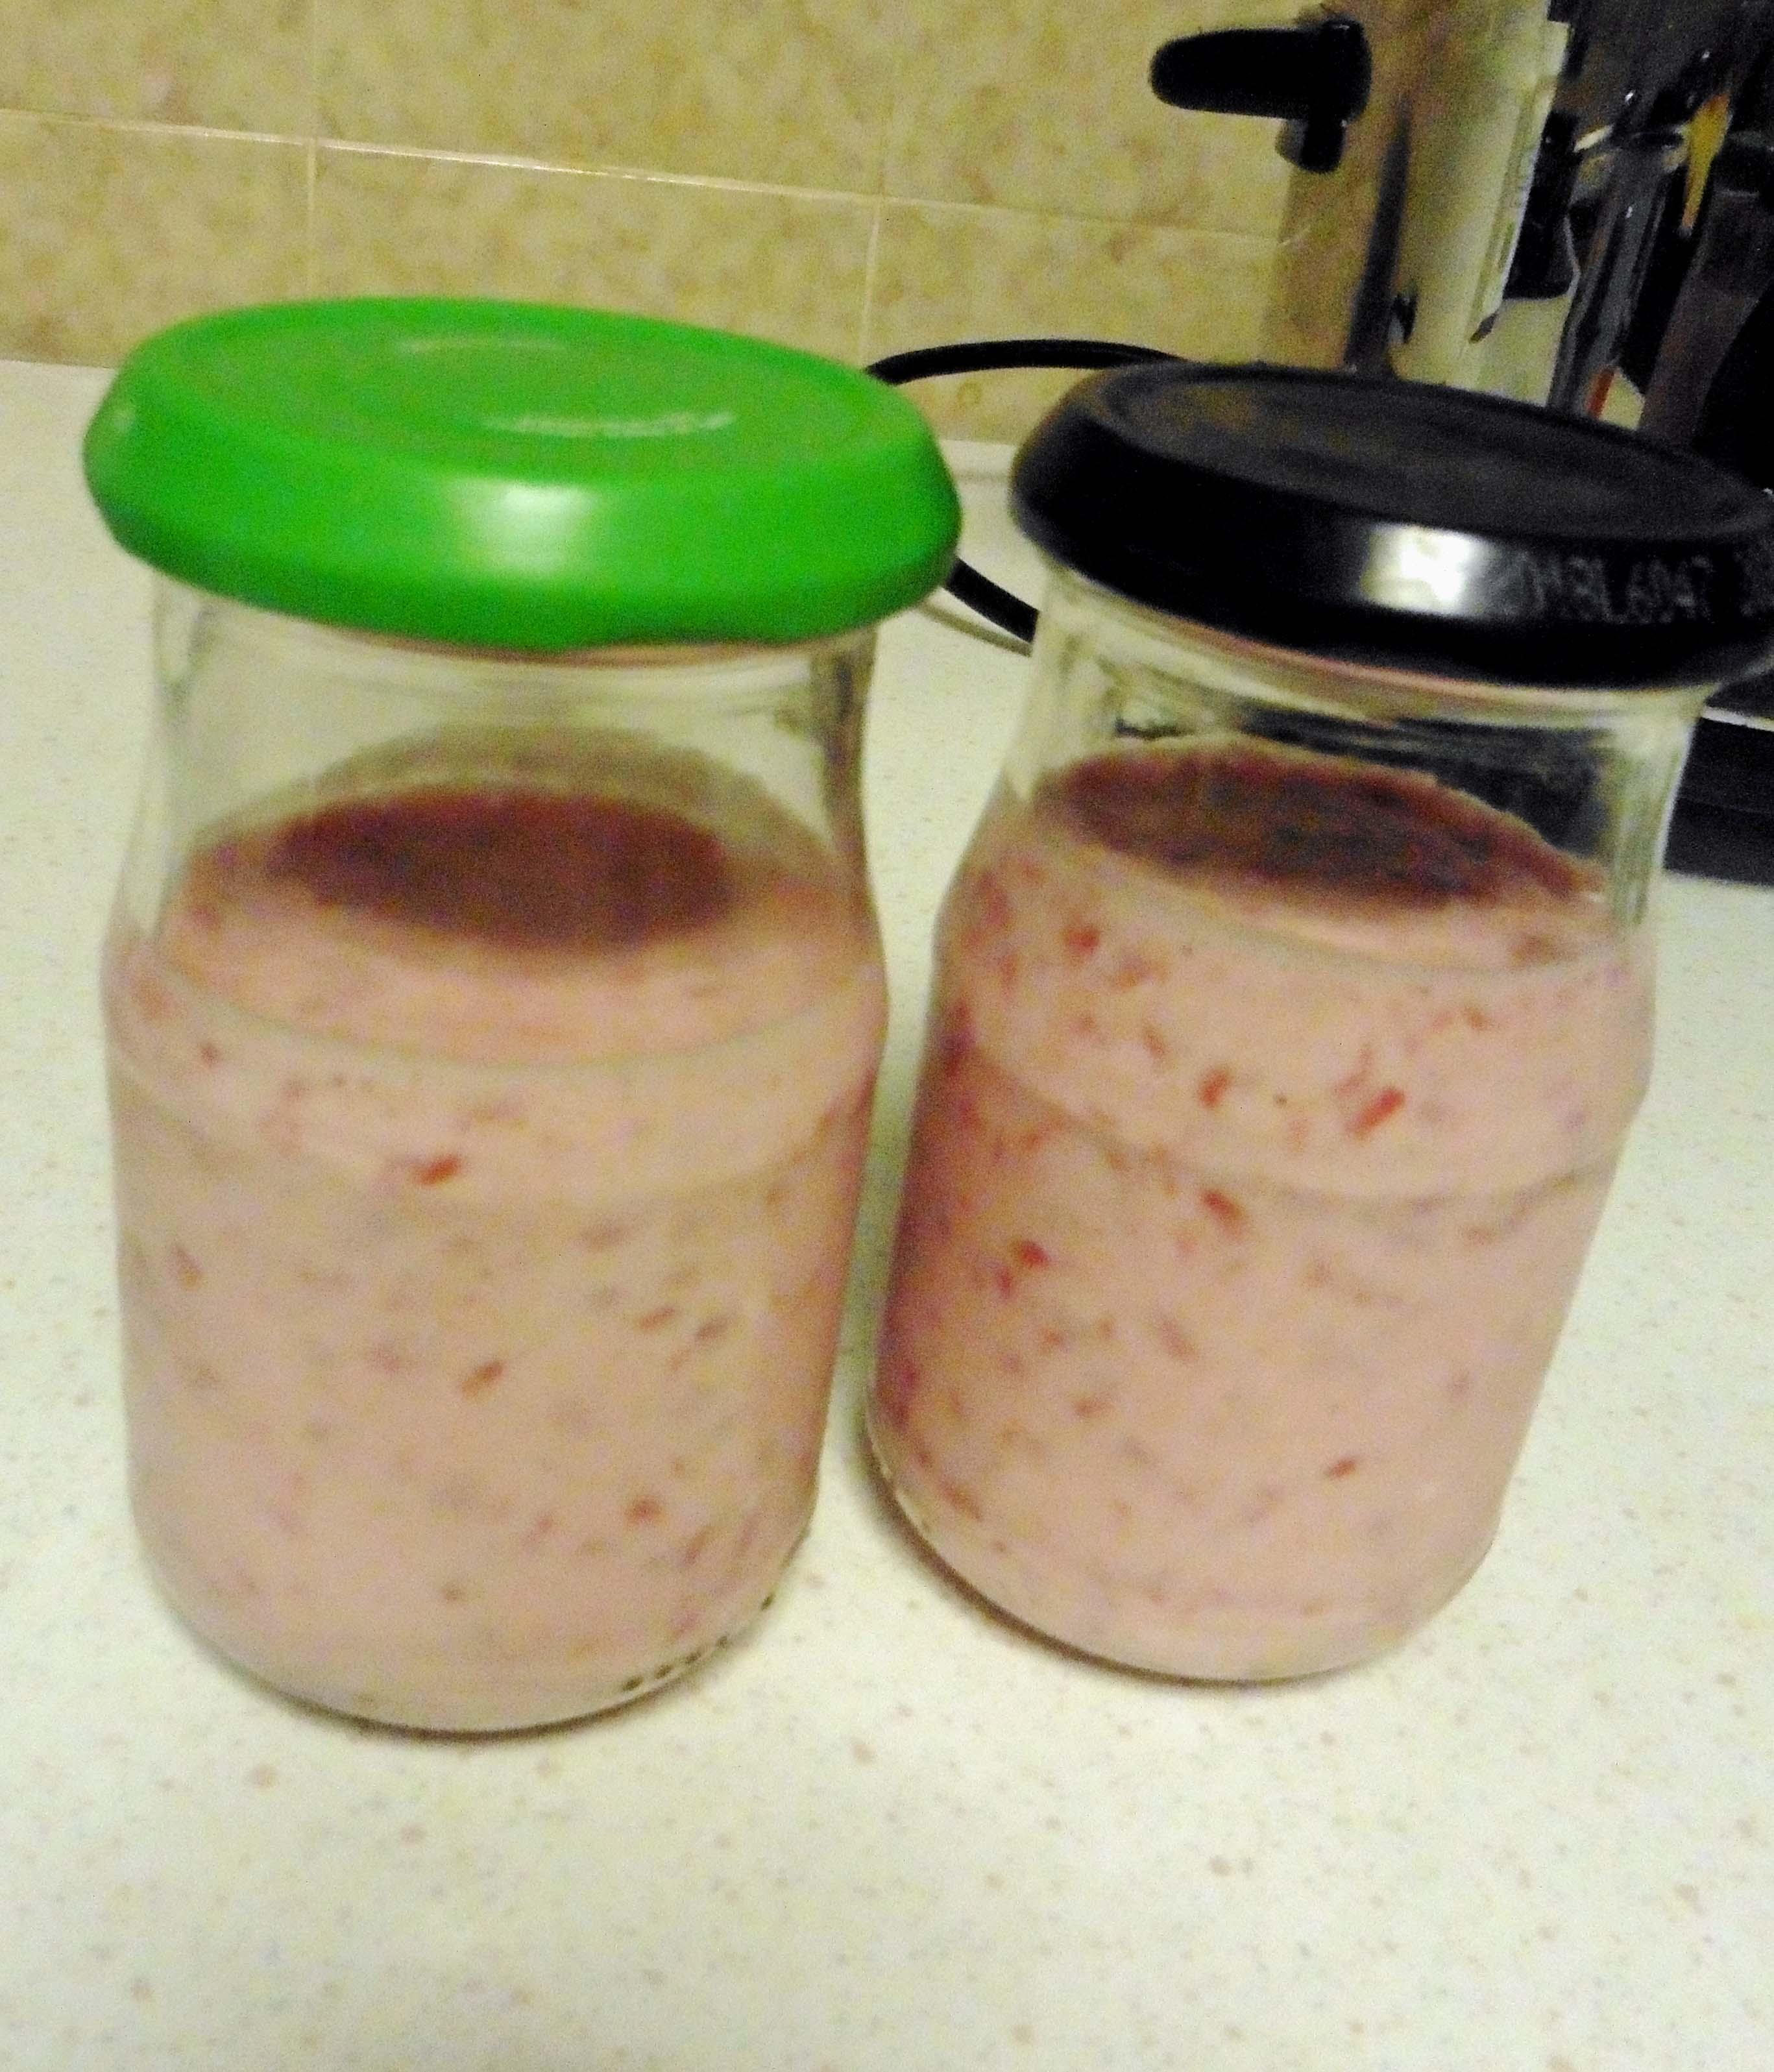 Fruit Yoghurt, How to Make it at Home?